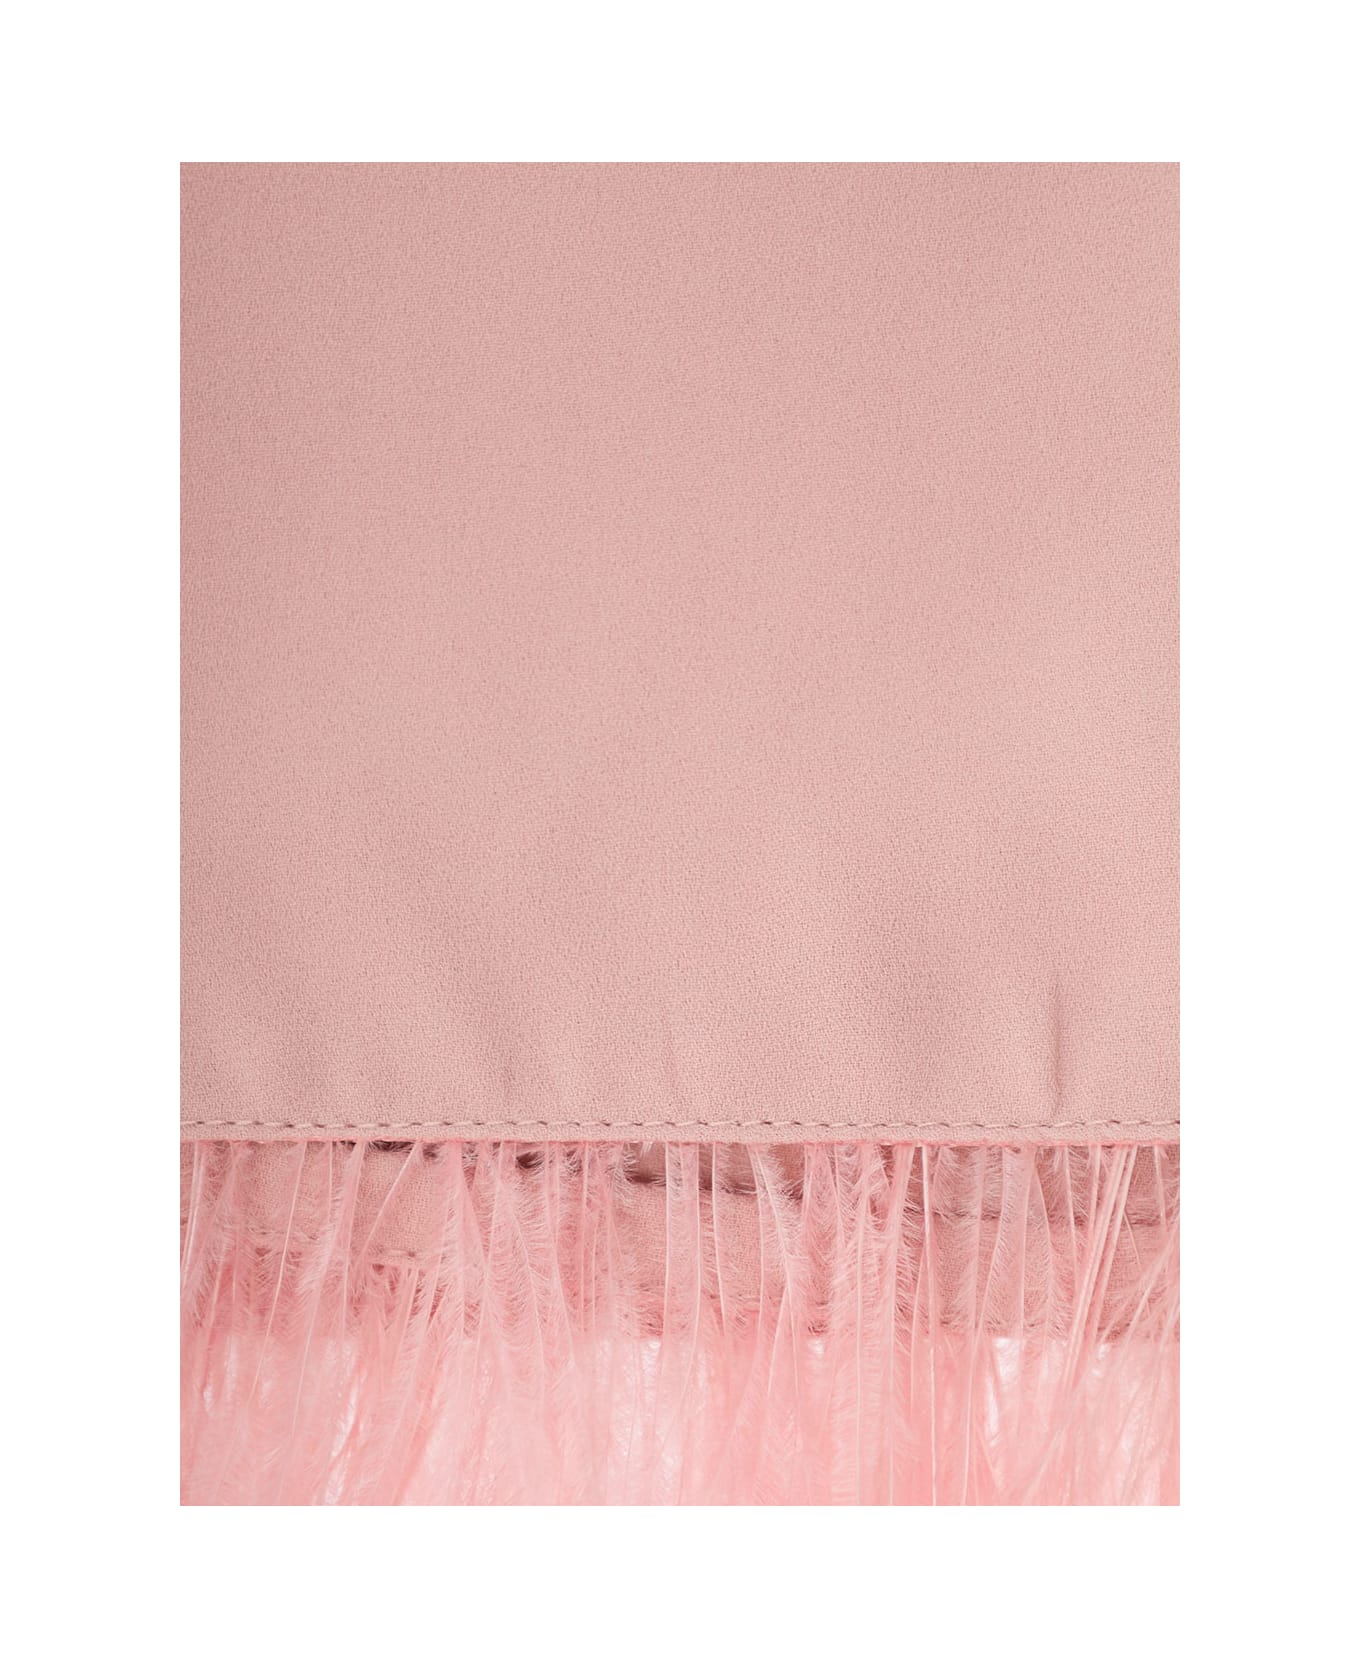 Liu-Jo Pink Stole With Feathers Trim In Fabric Woman - Pink